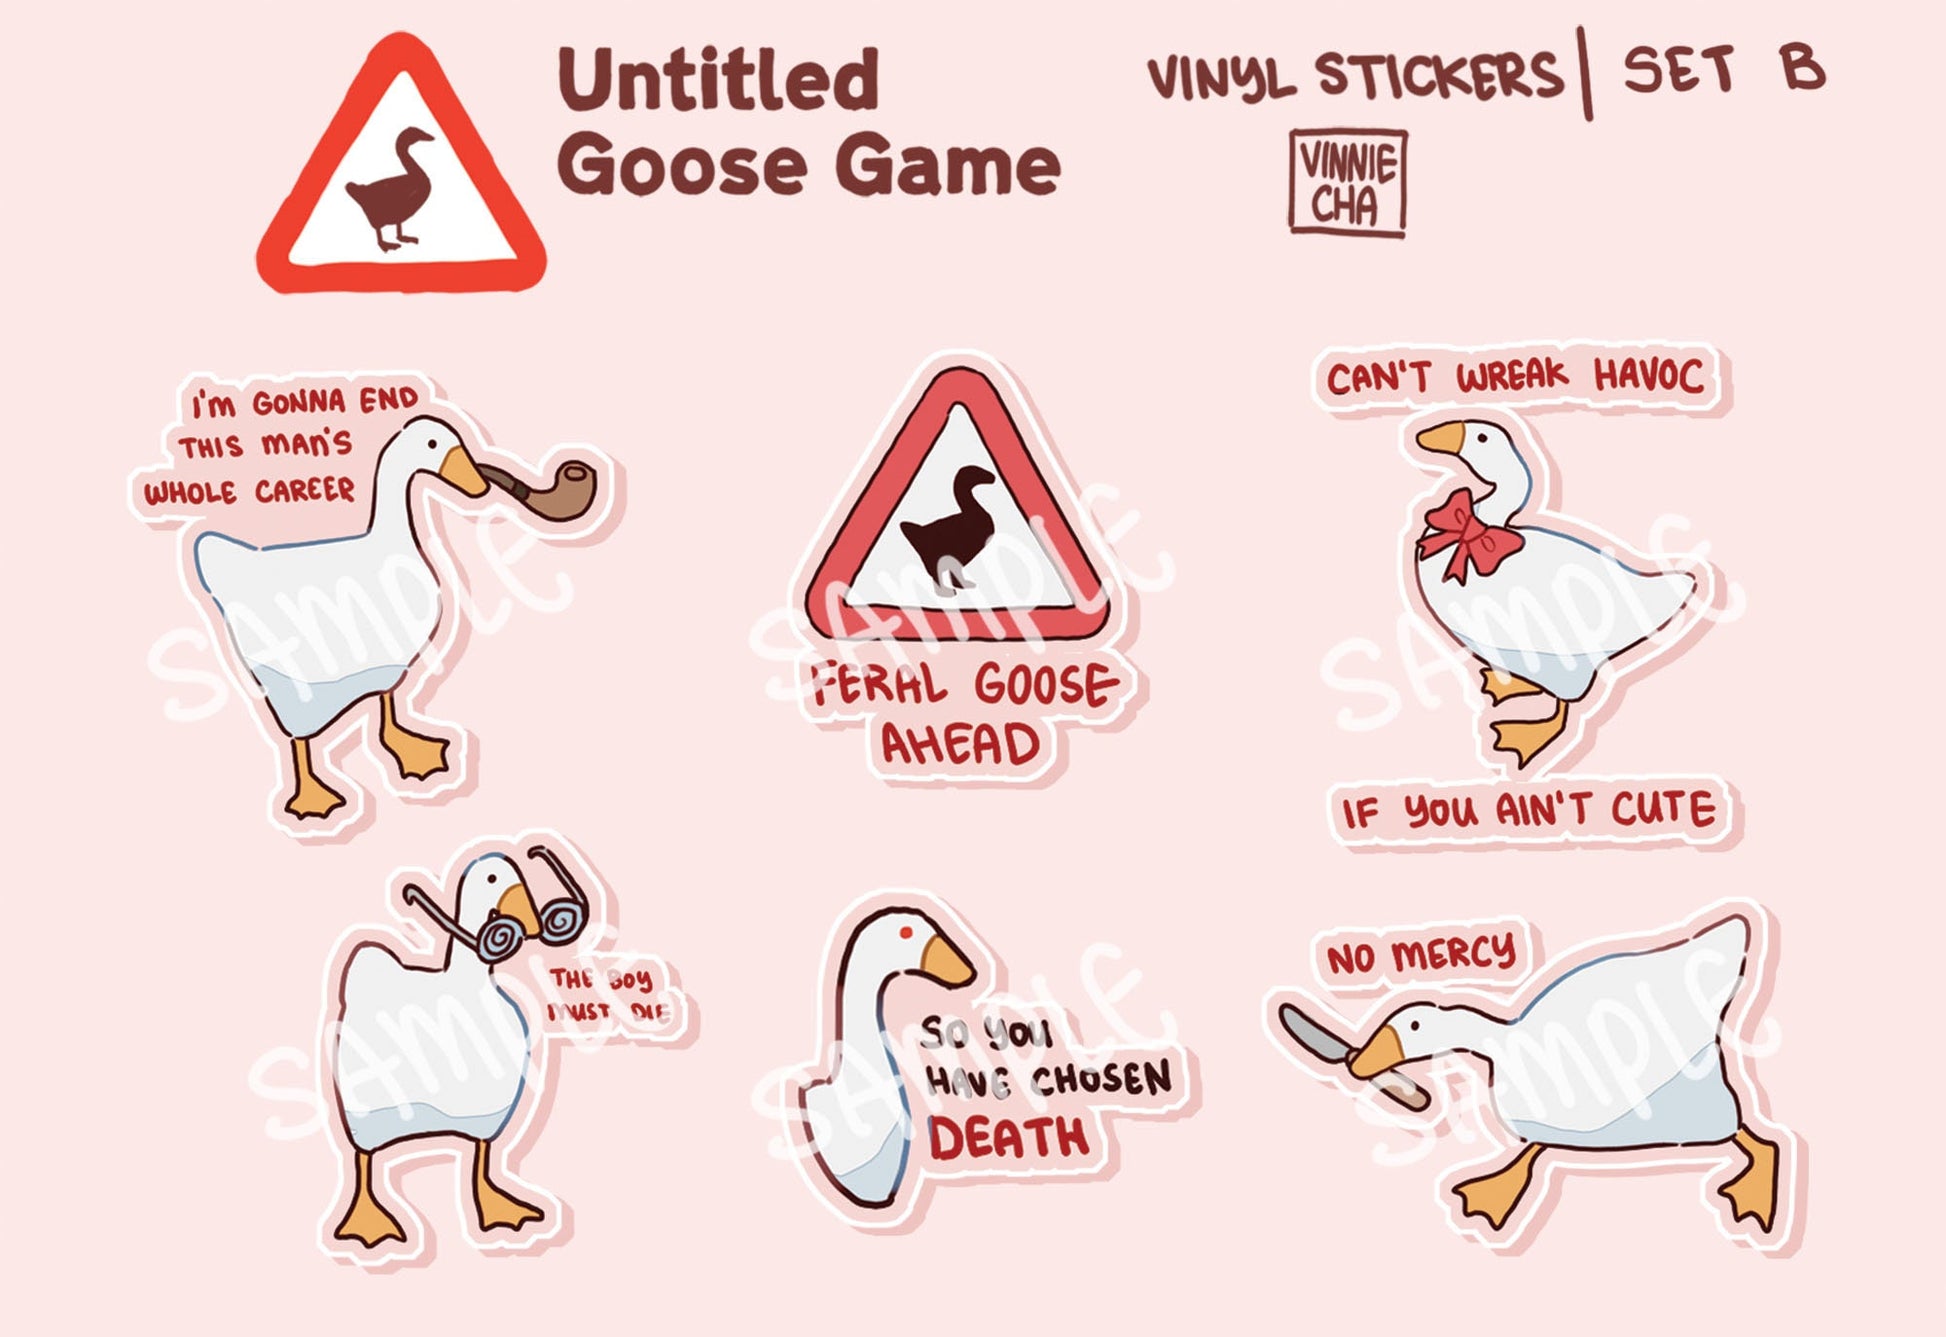 Playing 'Untitled Goose Game' is the new punching a wall - The